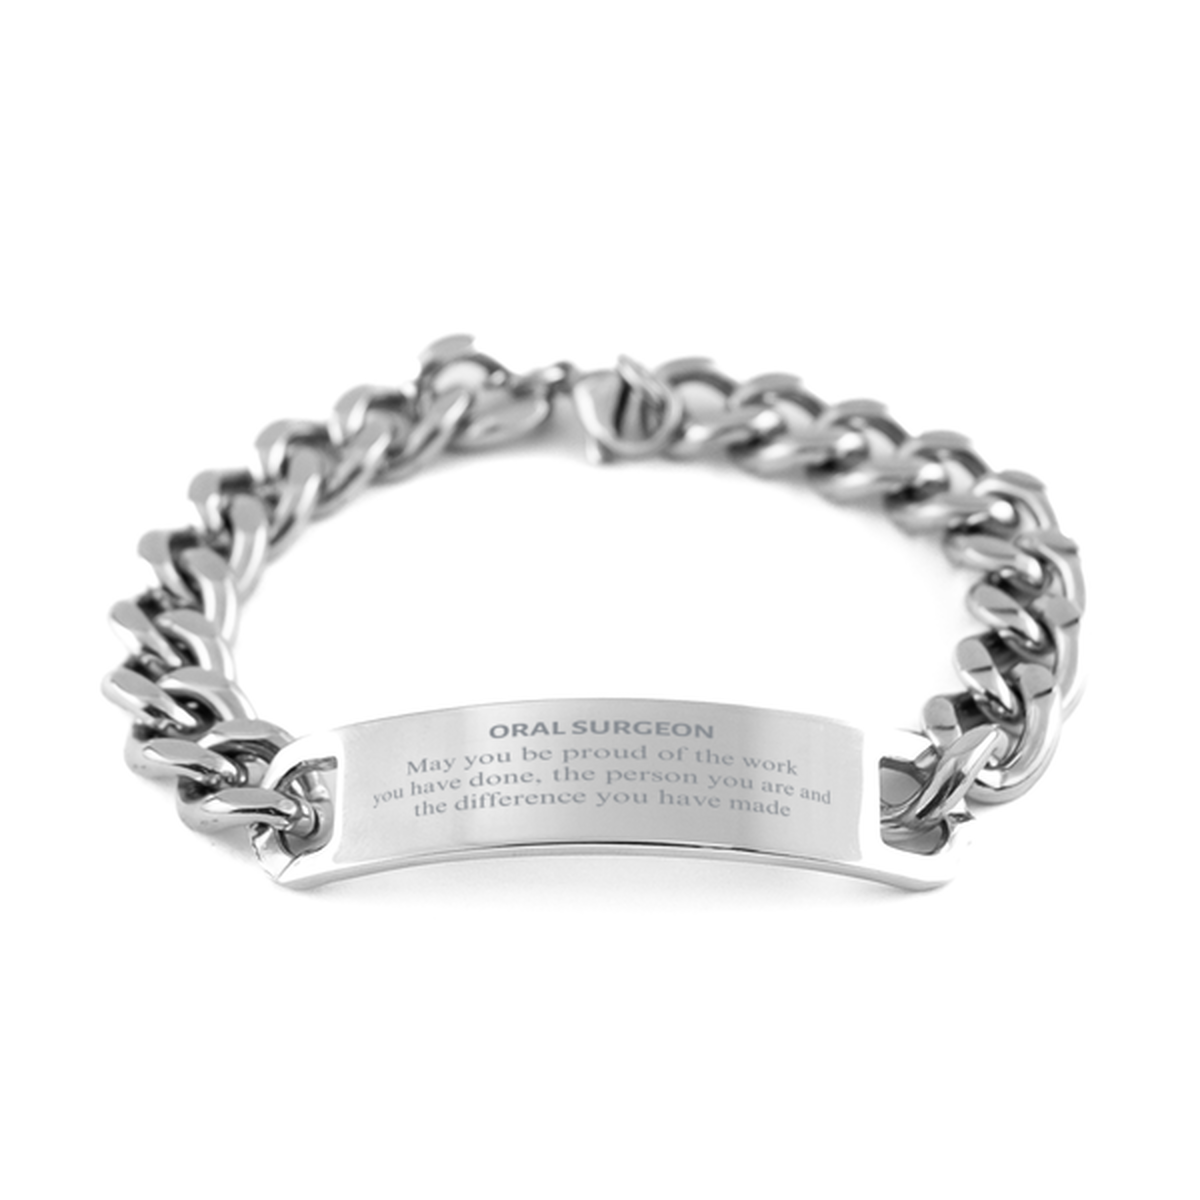 Oral Surgeon May you be proud of the work you have done, Retirement Oral Surgeon Cuban Chain Stainless Steel Bracelet for Colleague Appreciation Gifts Amazing for Oral Surgeon